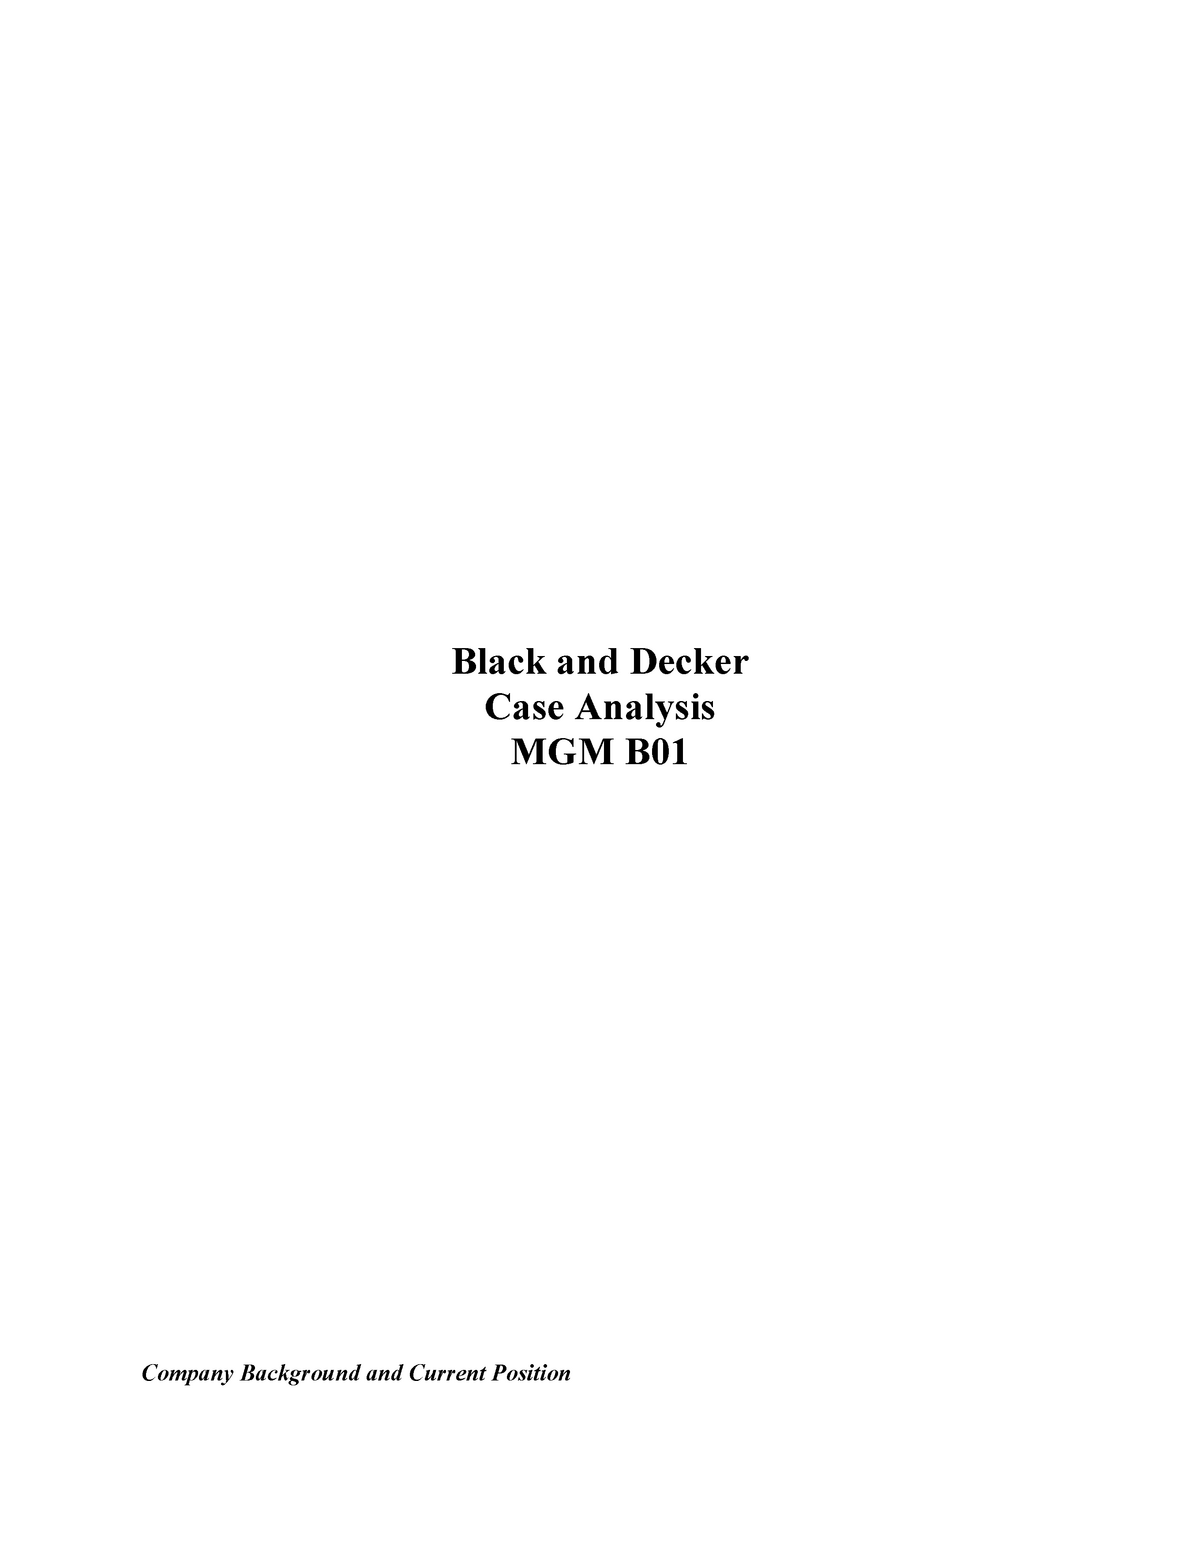 Black & Decker Corp.: Spacemaker Plus Coffeemaker (A) Case Solution And  Analysis, HBR Case Study Solution & Analysis of Harvard Case Studies